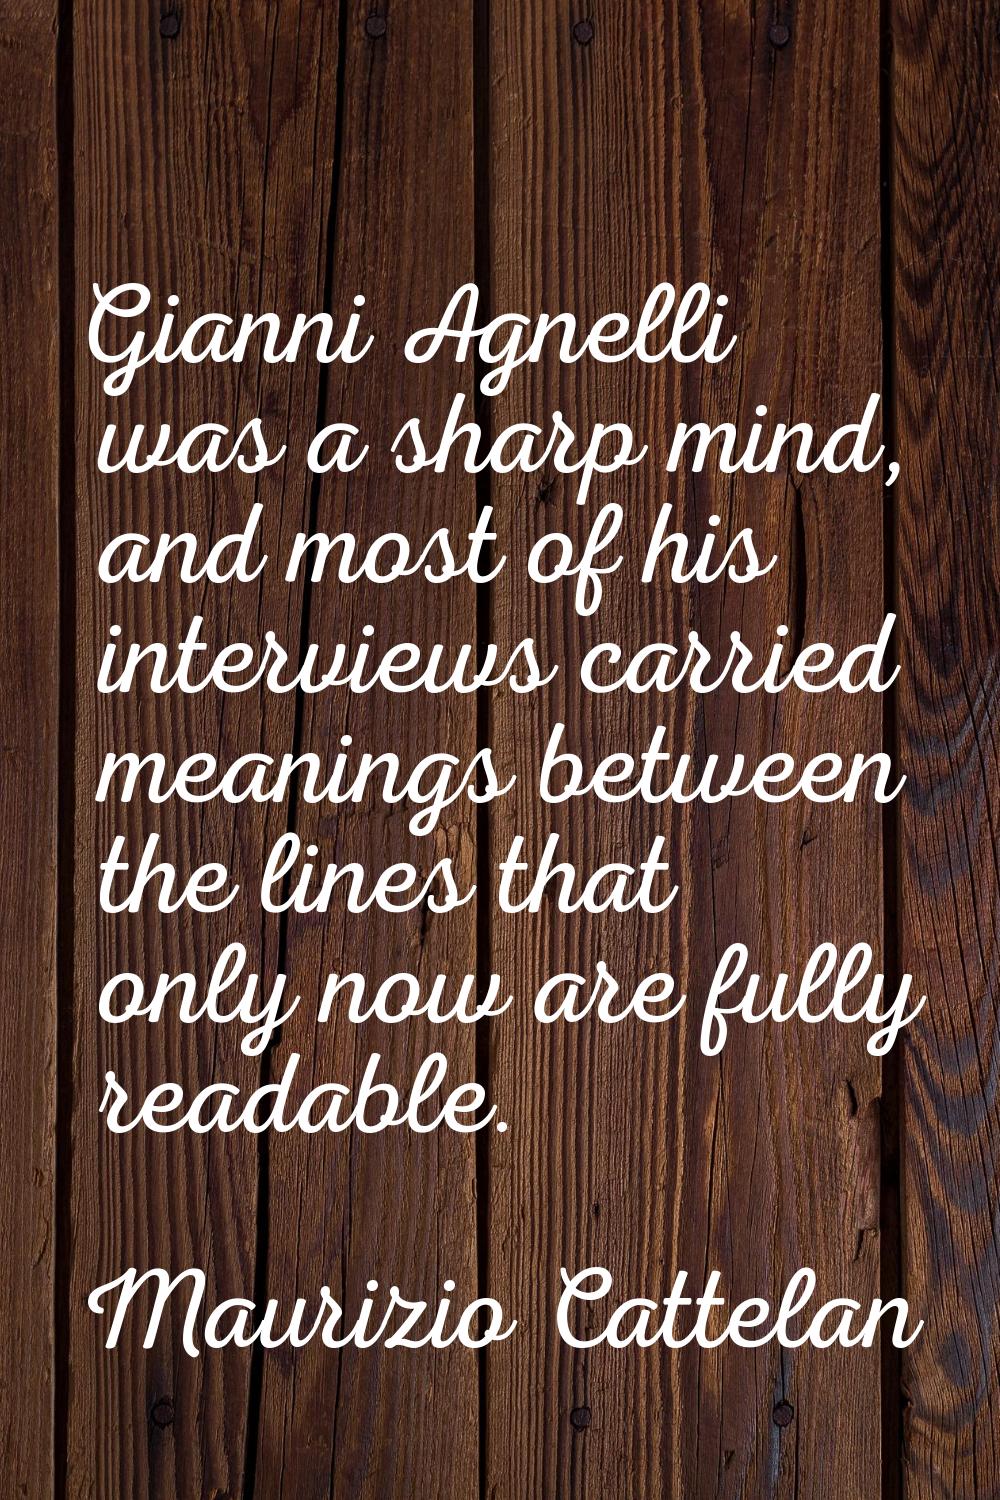 Gianni Agnelli was a sharp mind, and most of his interviews carried meanings between the lines that